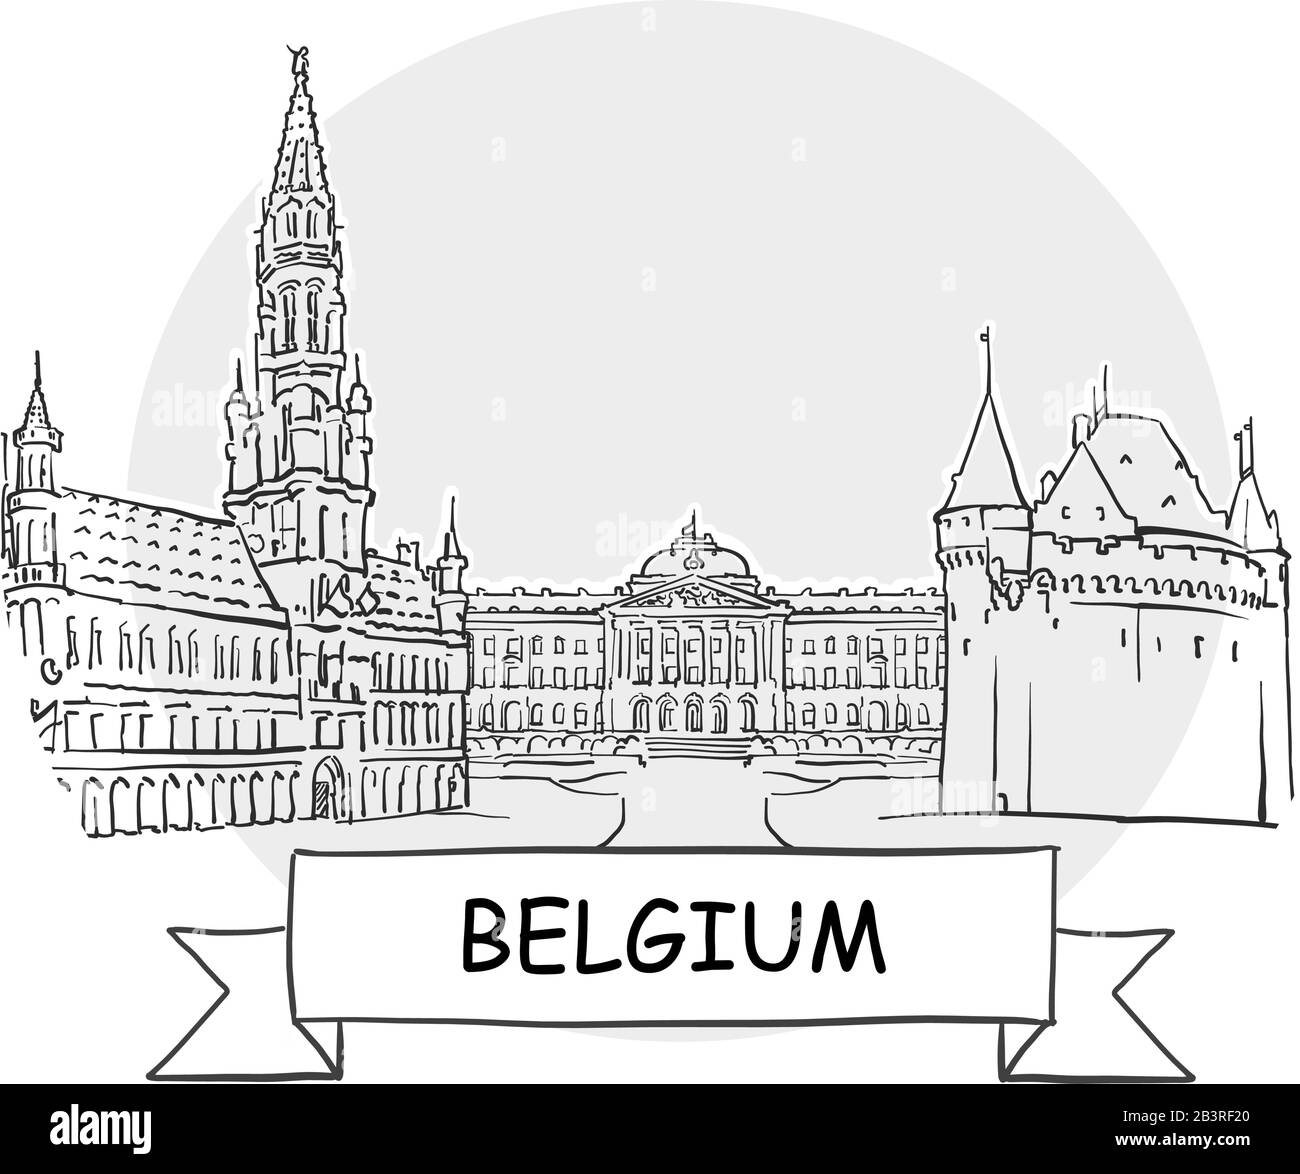 Belgium Hand-Drawn Urban Vector Sign. Black Line Art Illustration with Ribbon and Title. Stock Vector